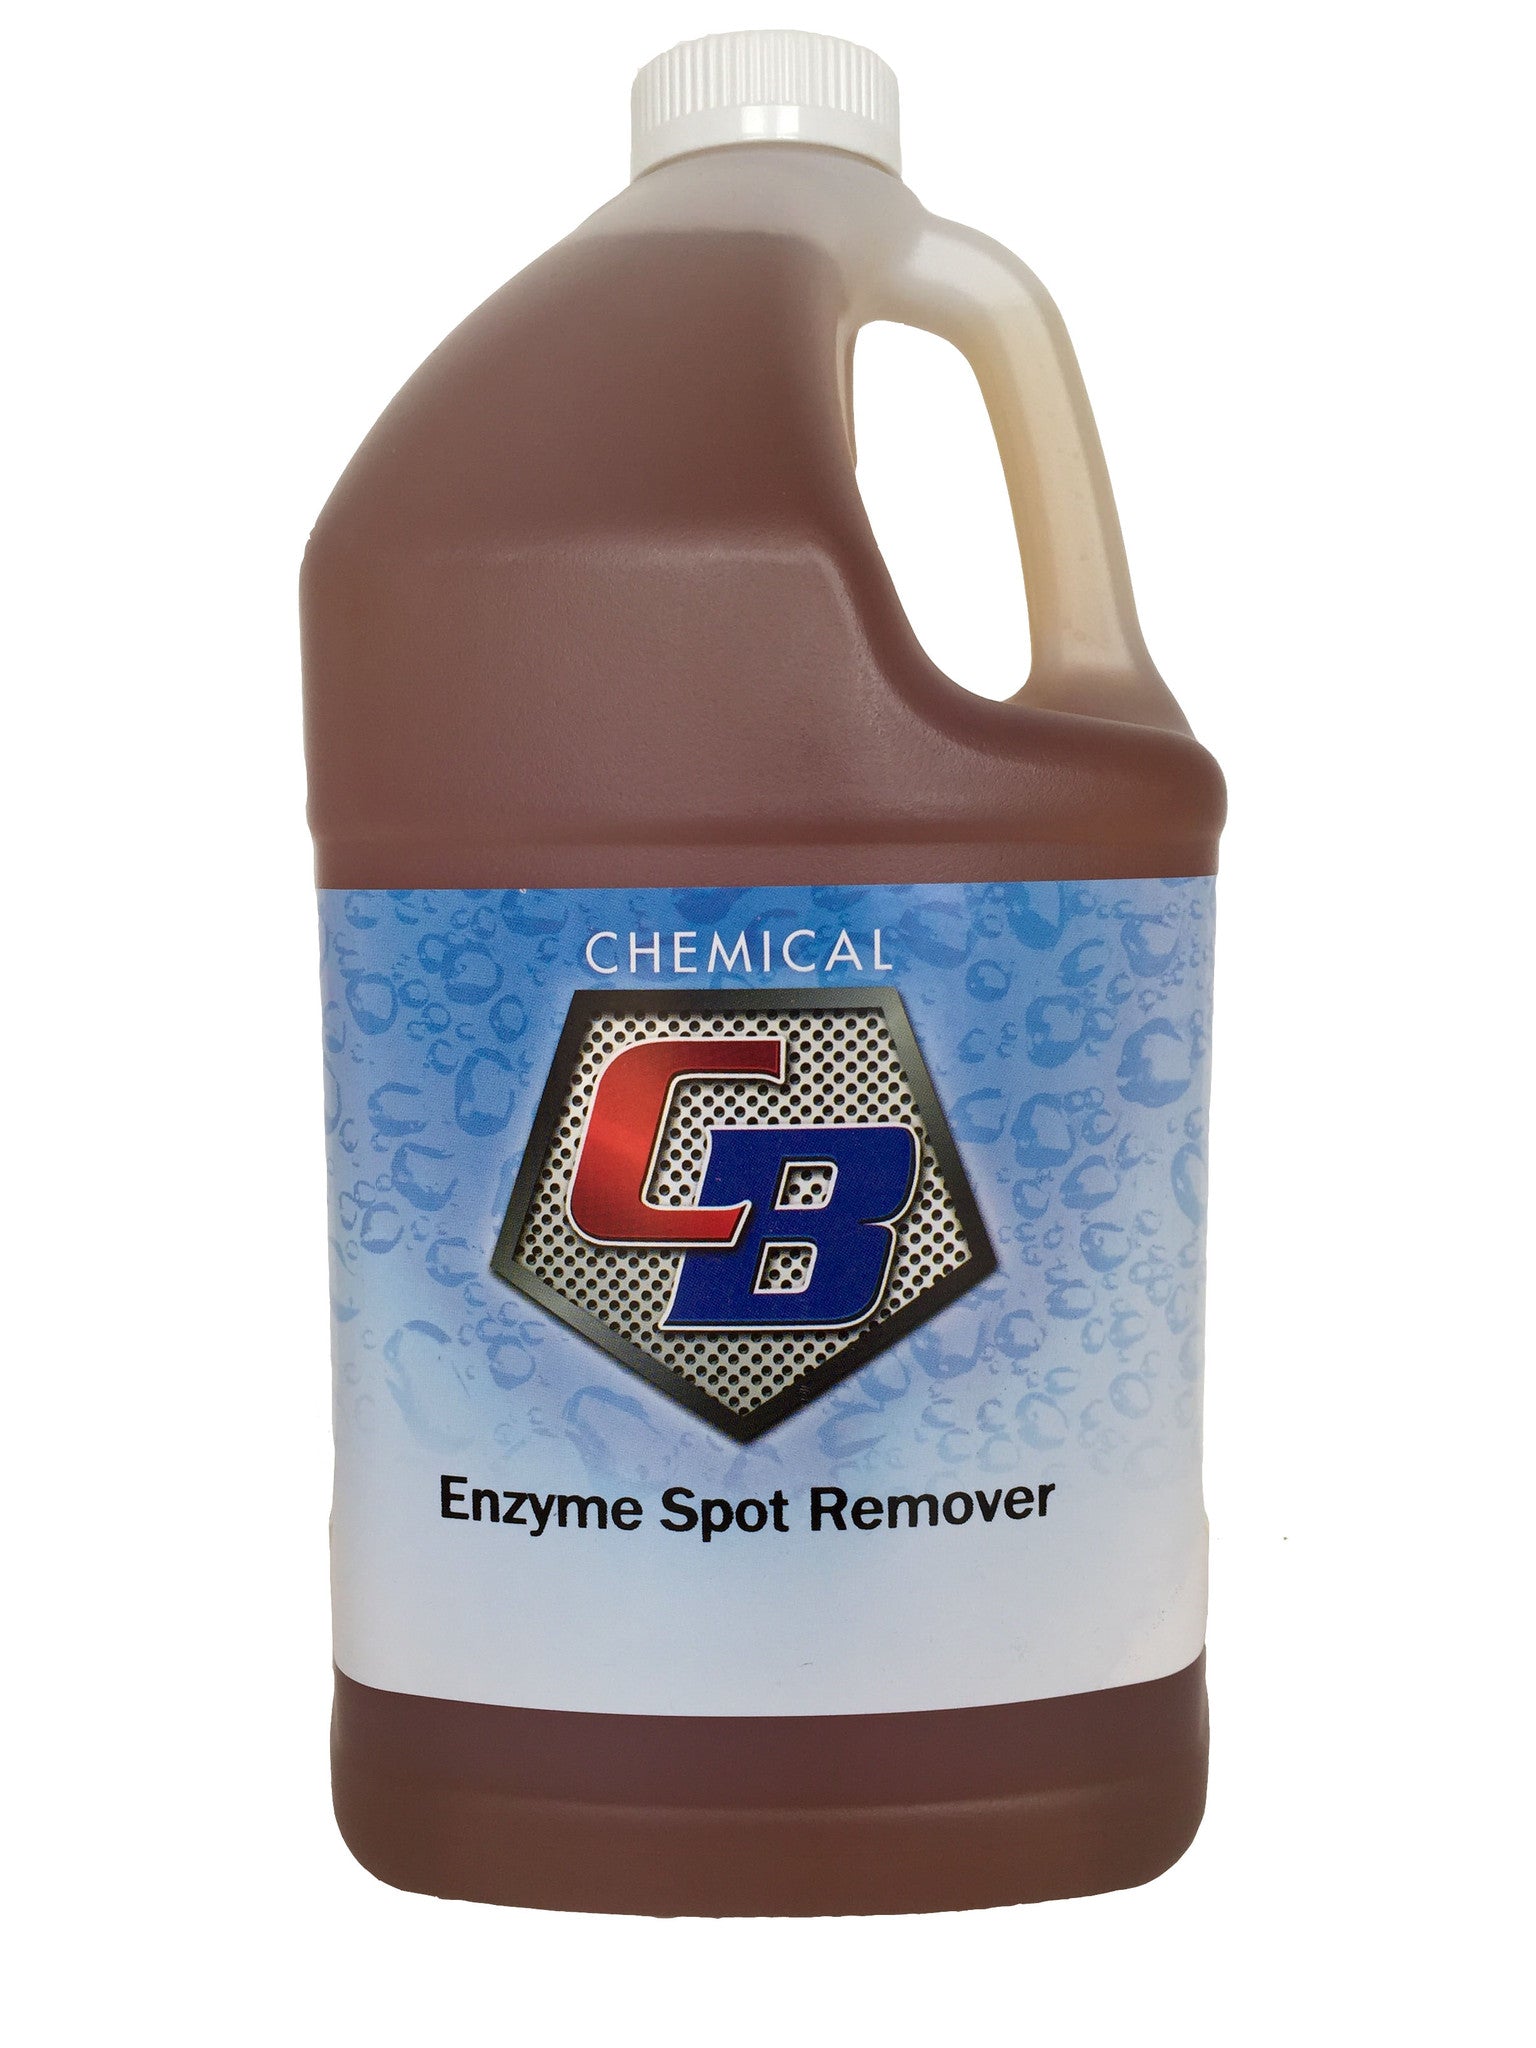 Enzyme Spot Remover